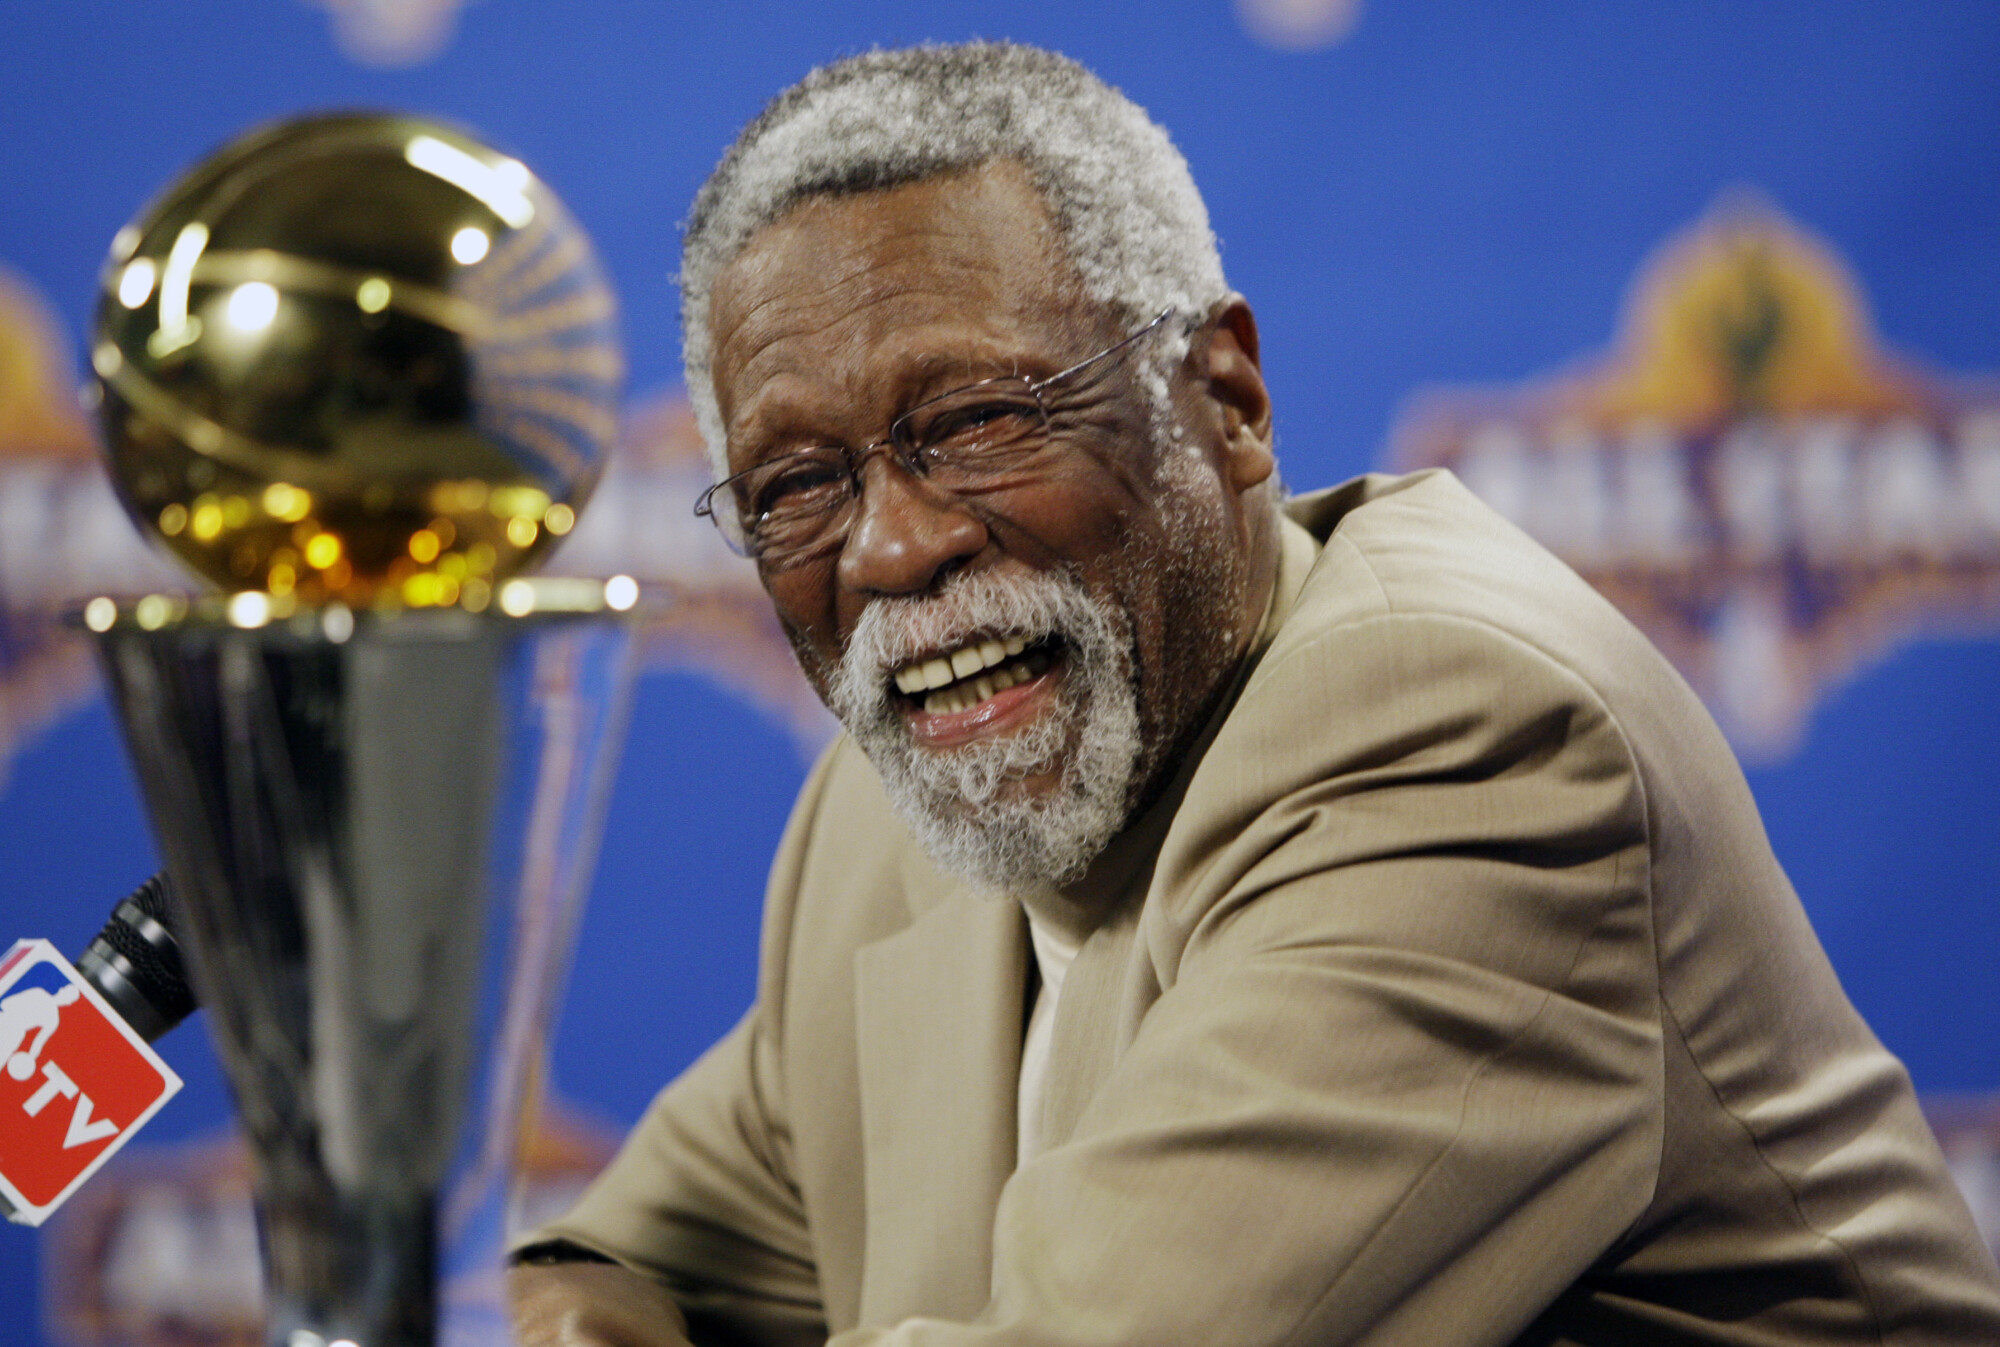 Celtics add No. 6 in parquet paint to honor Bill Russell